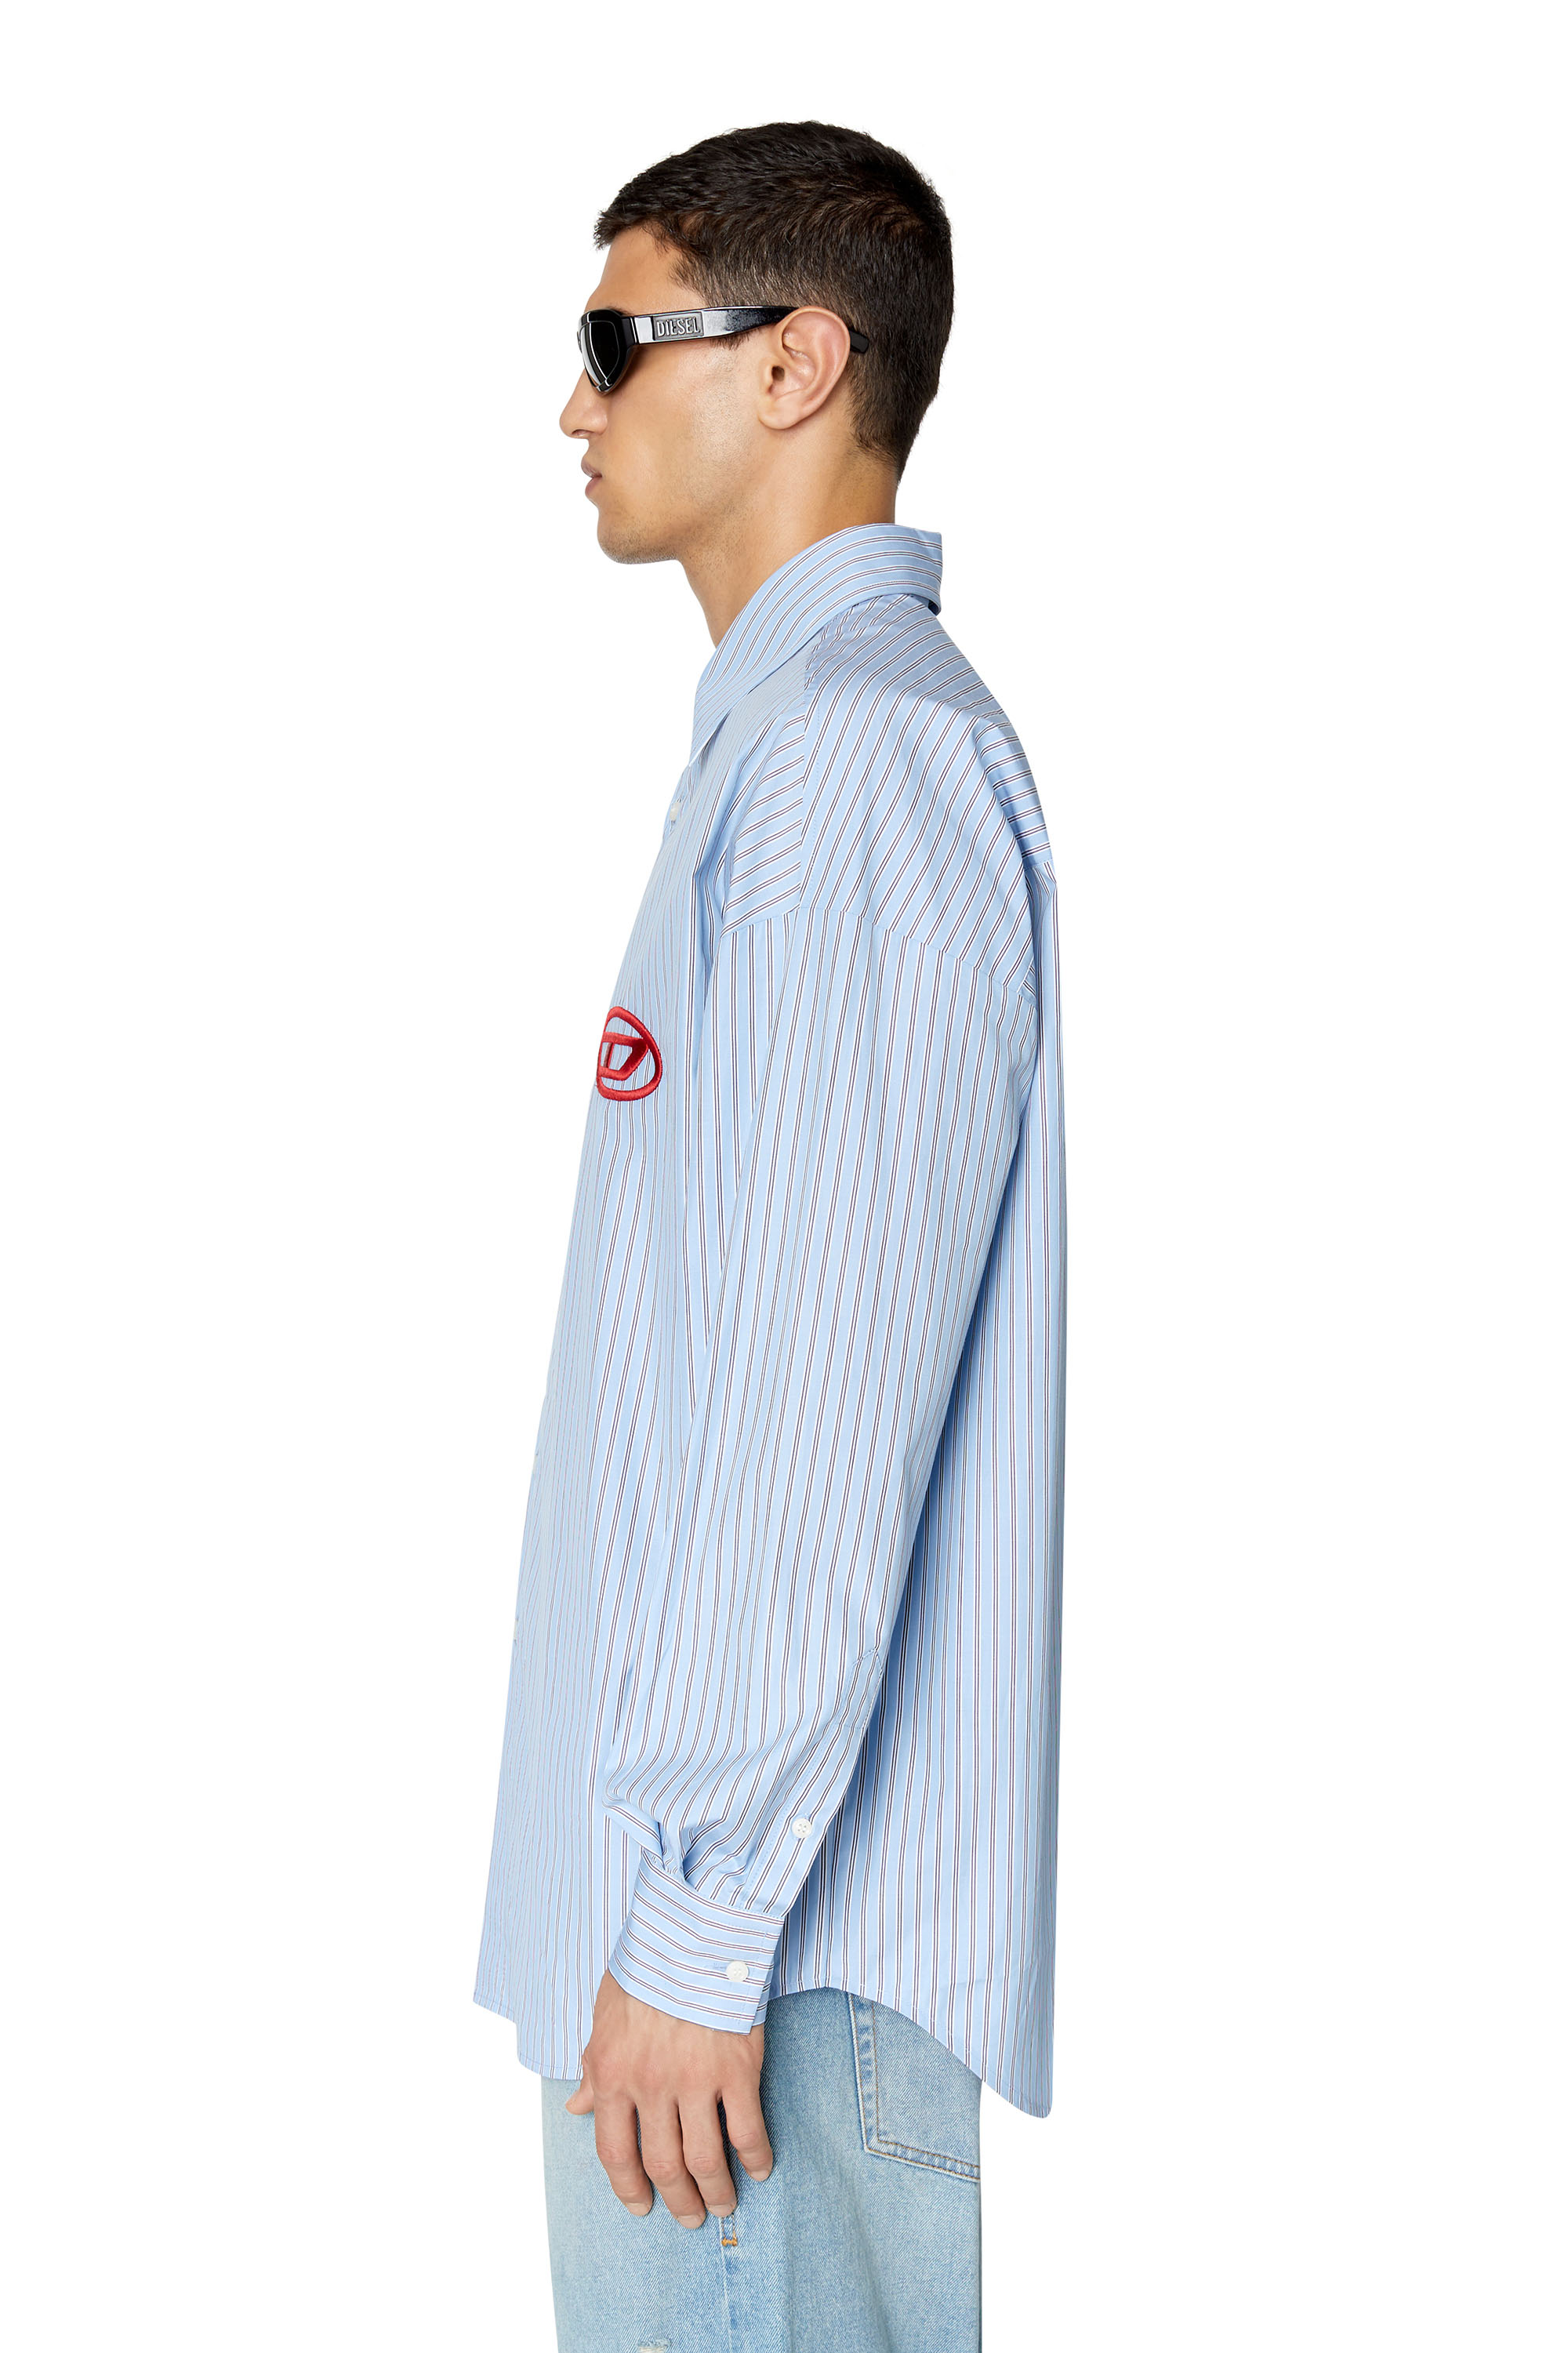 S-DOUBLY-STRIPE-NW Man: Striped shirt with logo embroidery